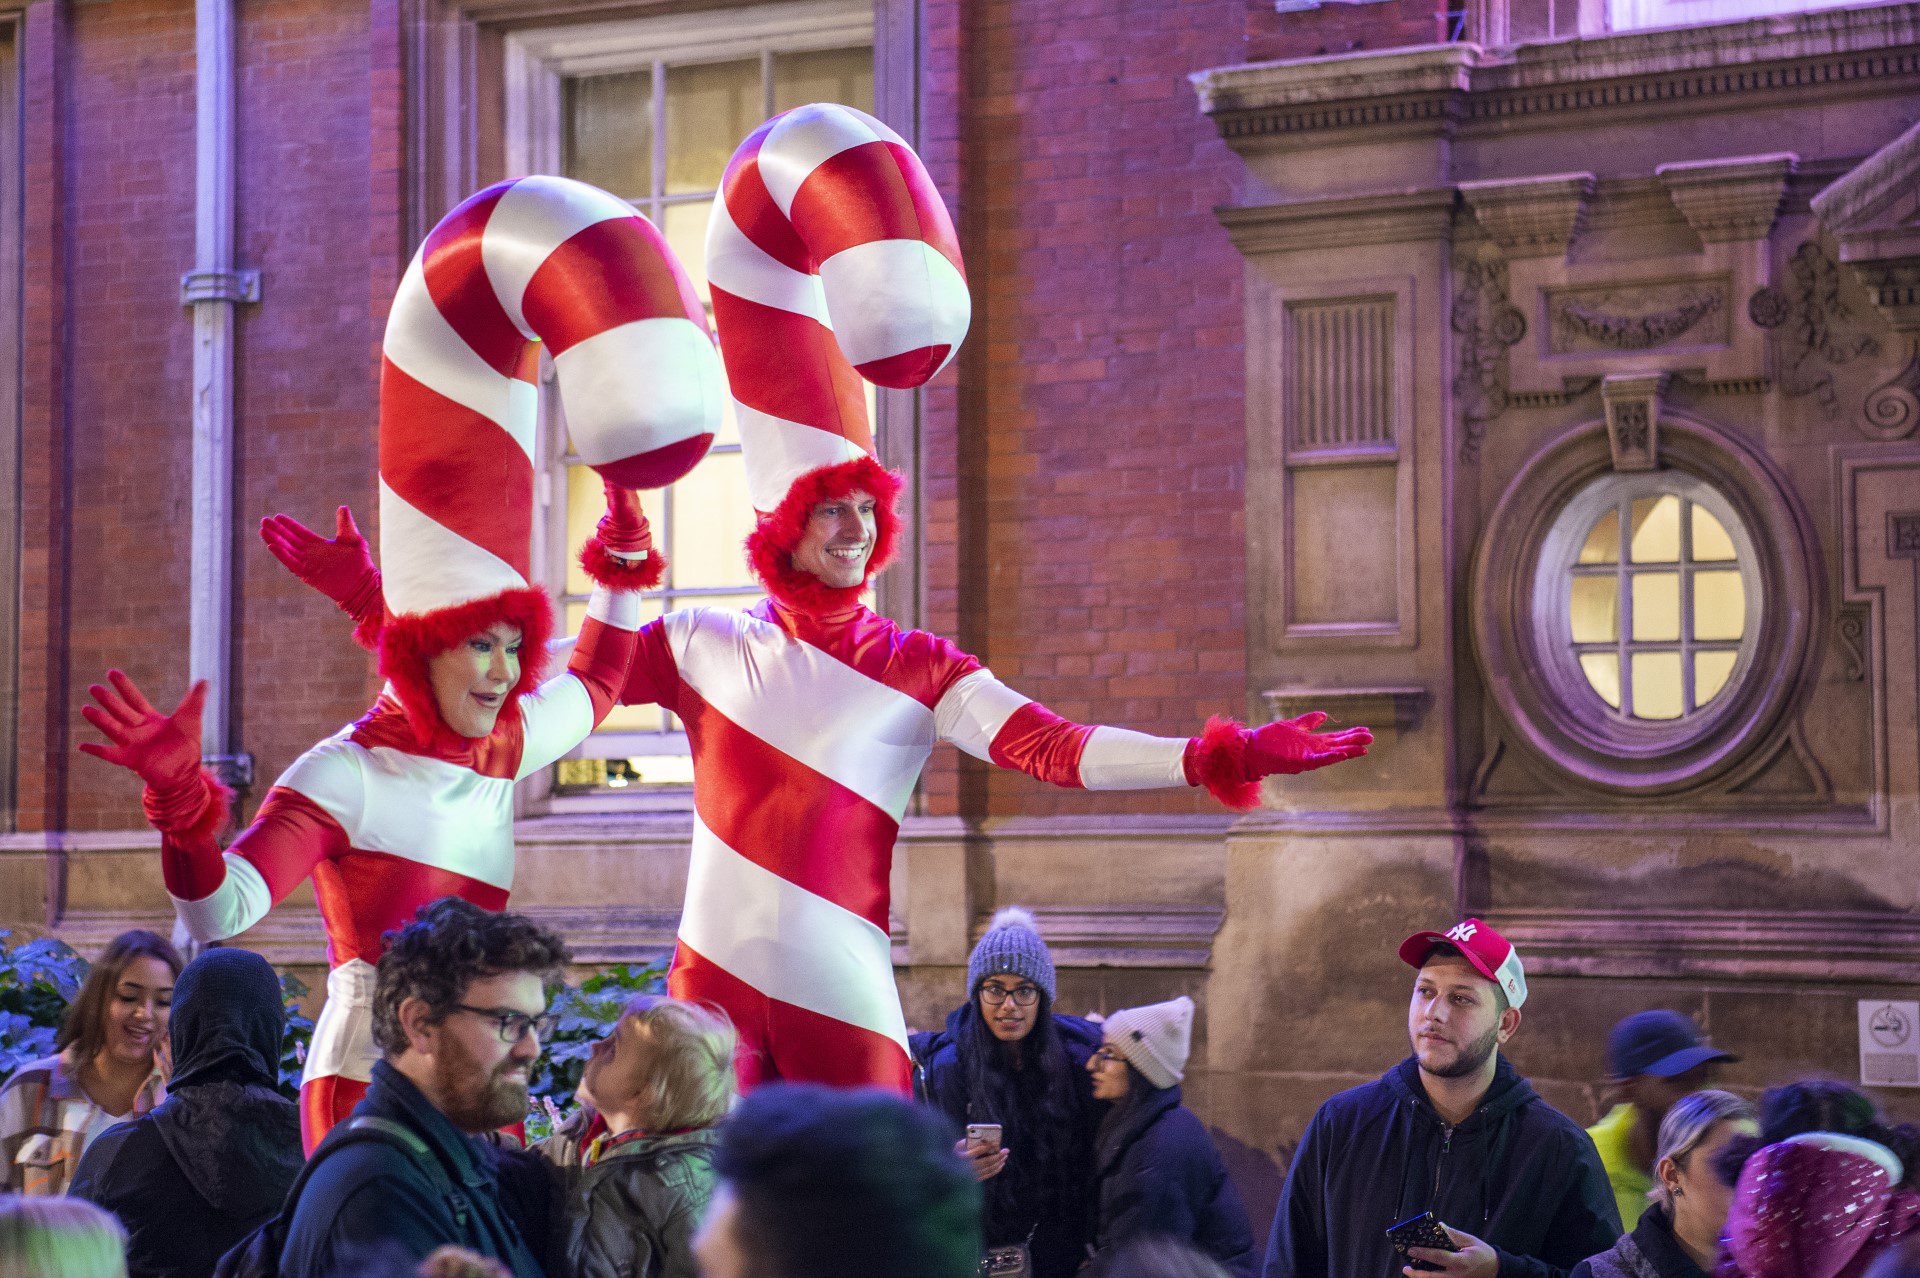 Two people dressed as candy canes among a crowd at Town Hall Square in Leicester